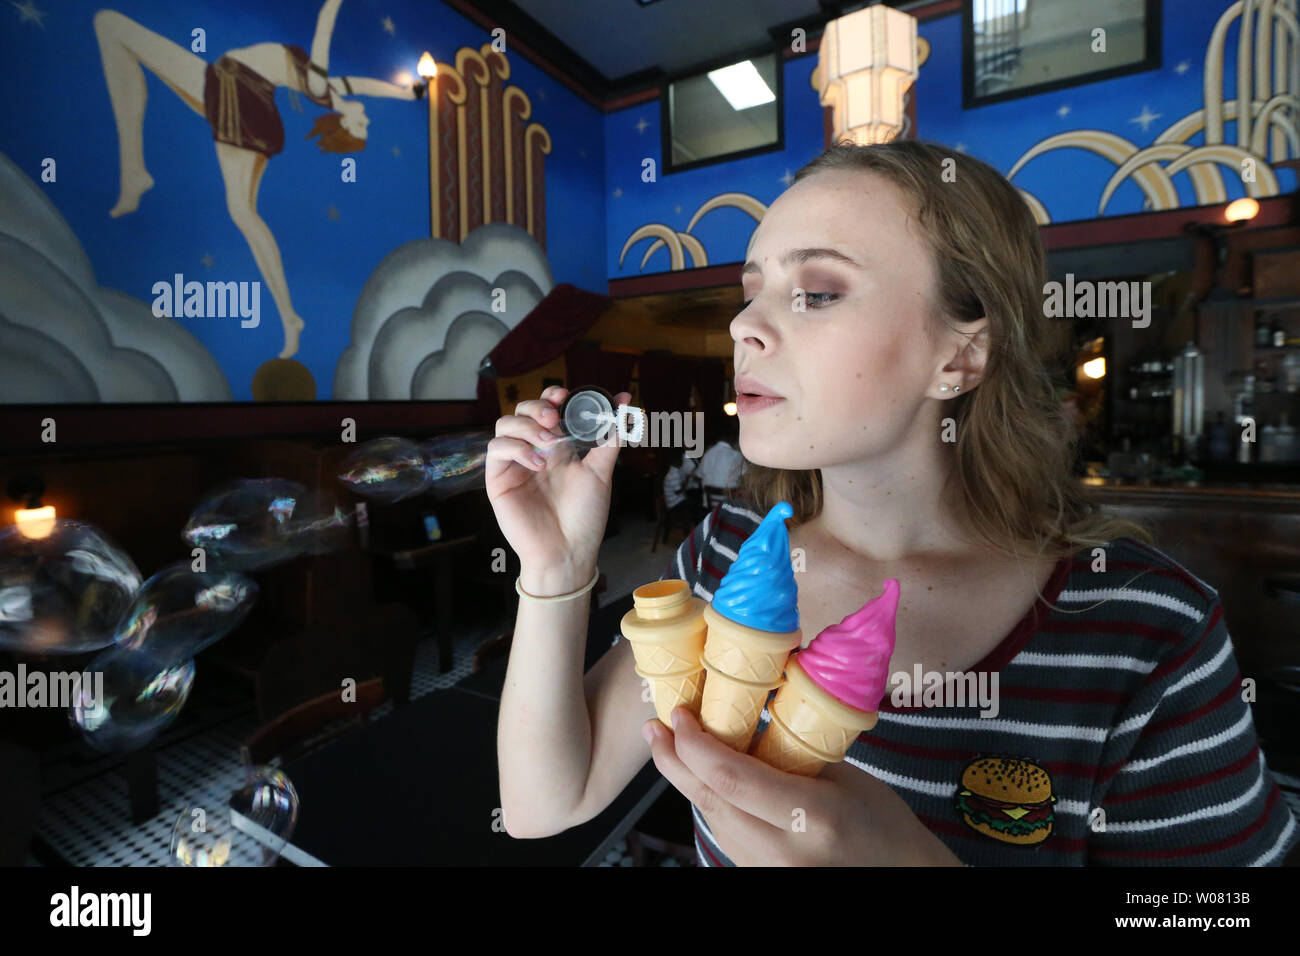 Teresa Strong, a server at the Fountain on Locust, checks her ice cream cone bubbles before celebrating a customers birthday on National Ice Cream Day in St. Louis on July 16, 2017. Photo by Bill Greenblatt/UPI Stock Photo